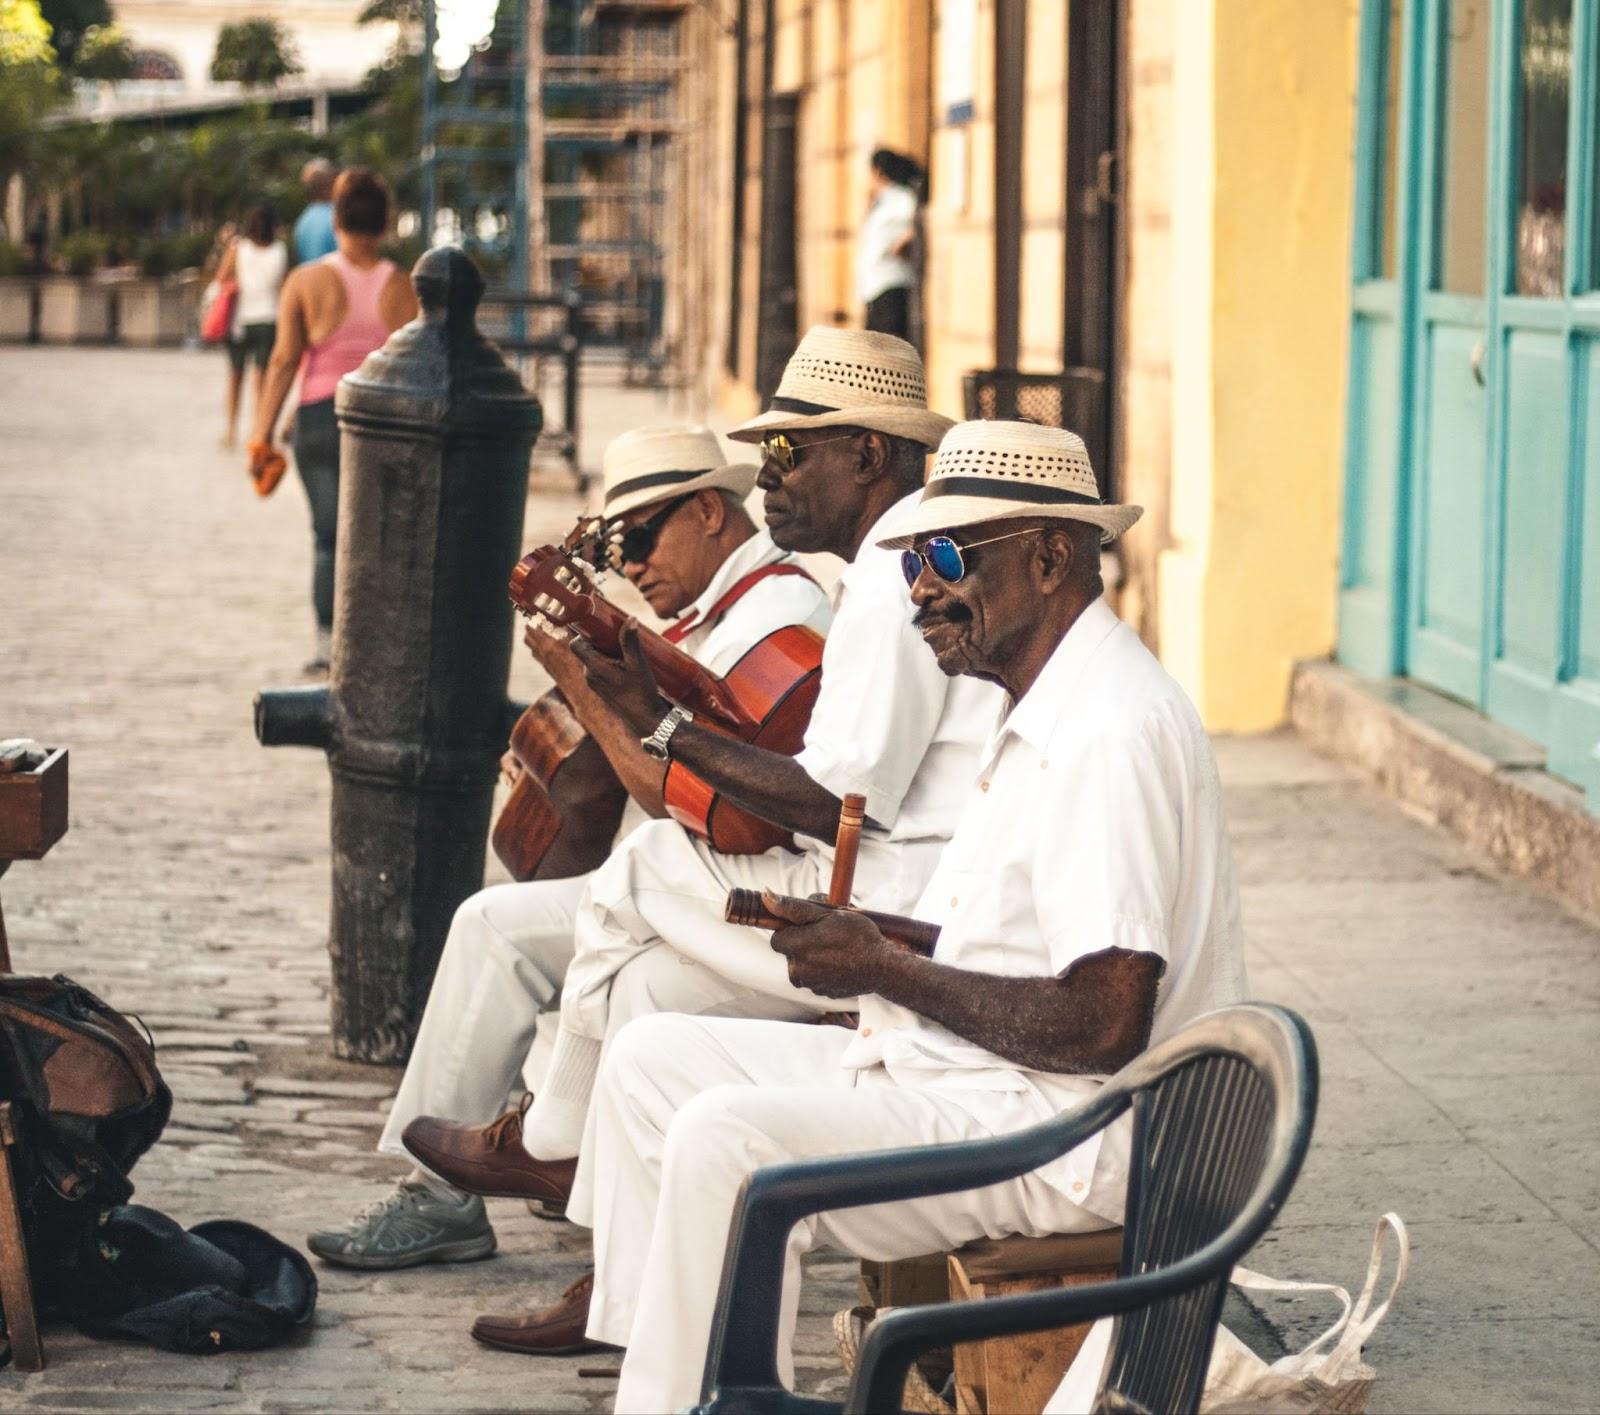 Local Cubans playing the guitar on a bench.